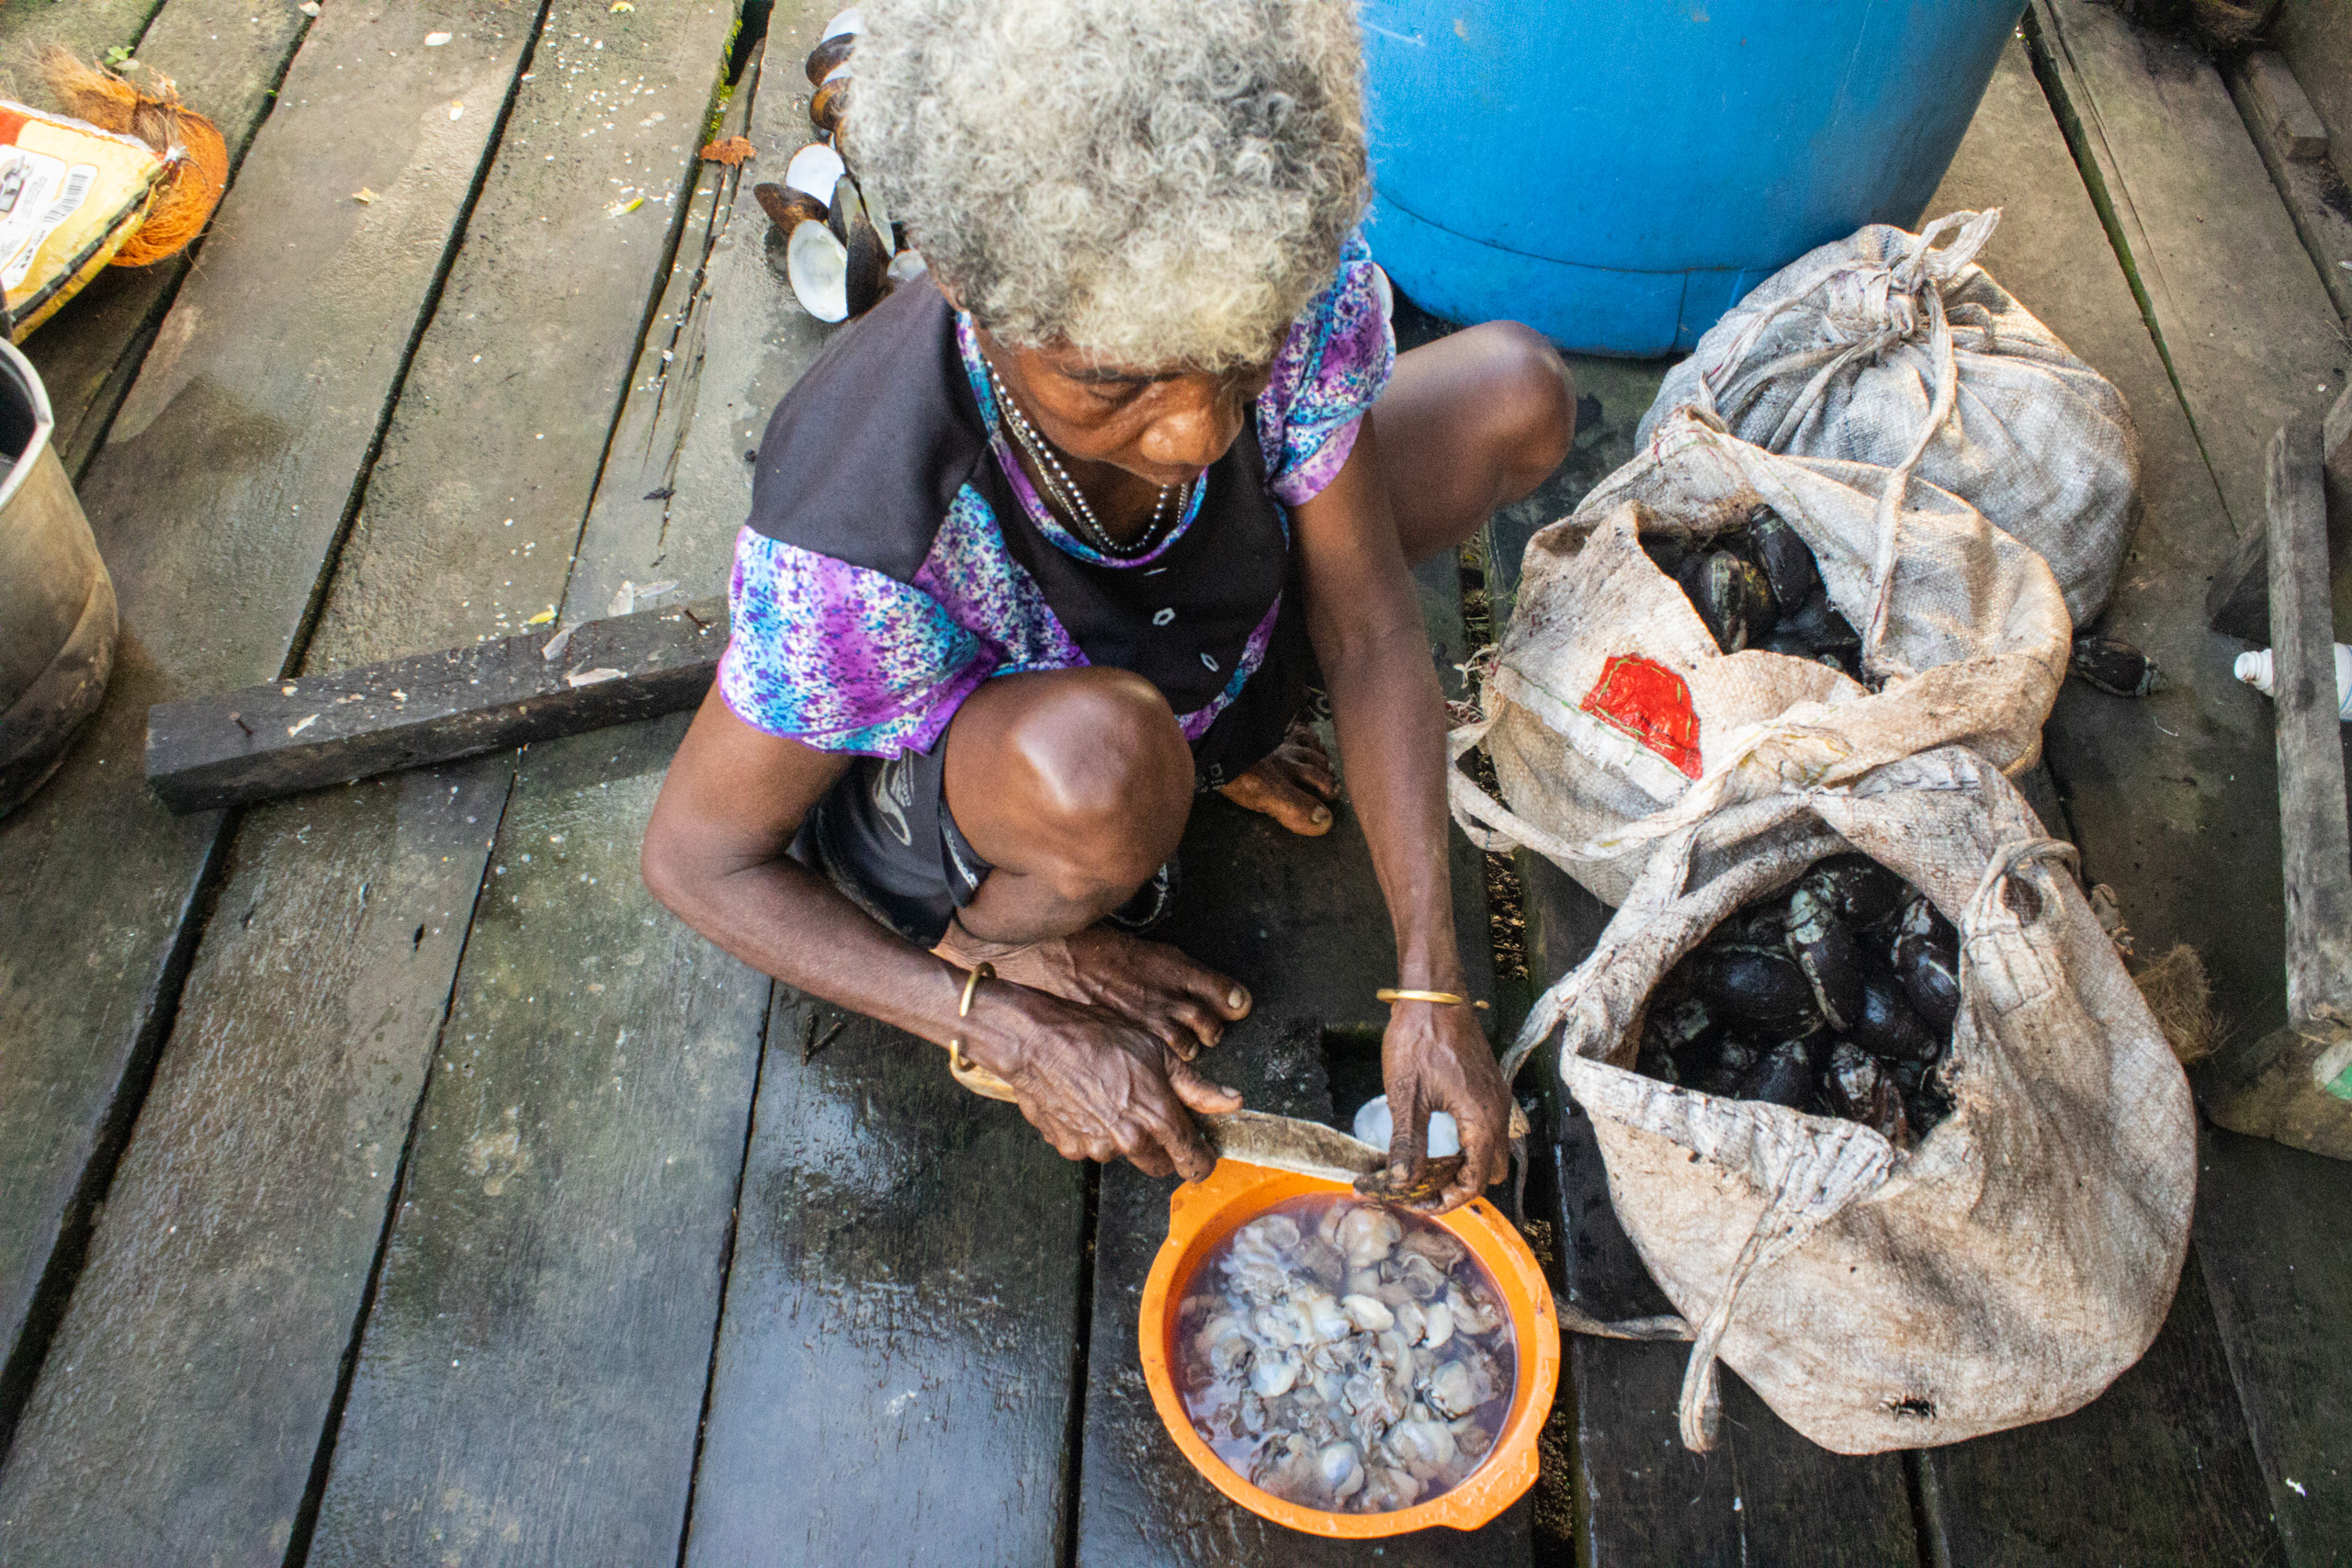 Maria Sawat cleans and prepares clams collected from the river